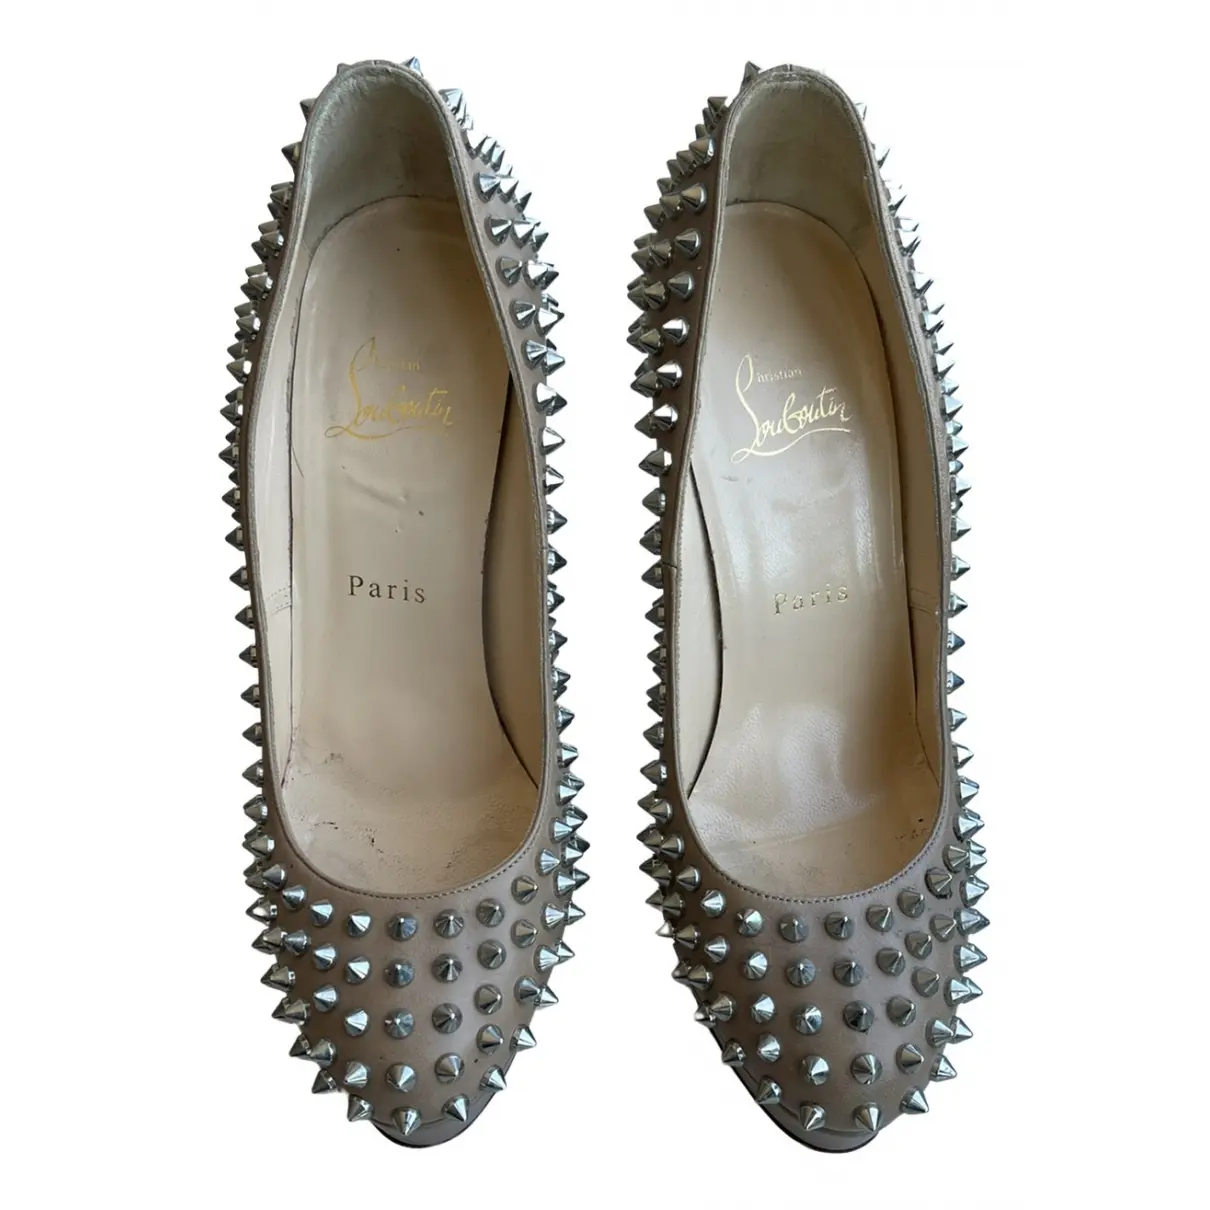 Nosy Spikes leather heels Christian Louboutin